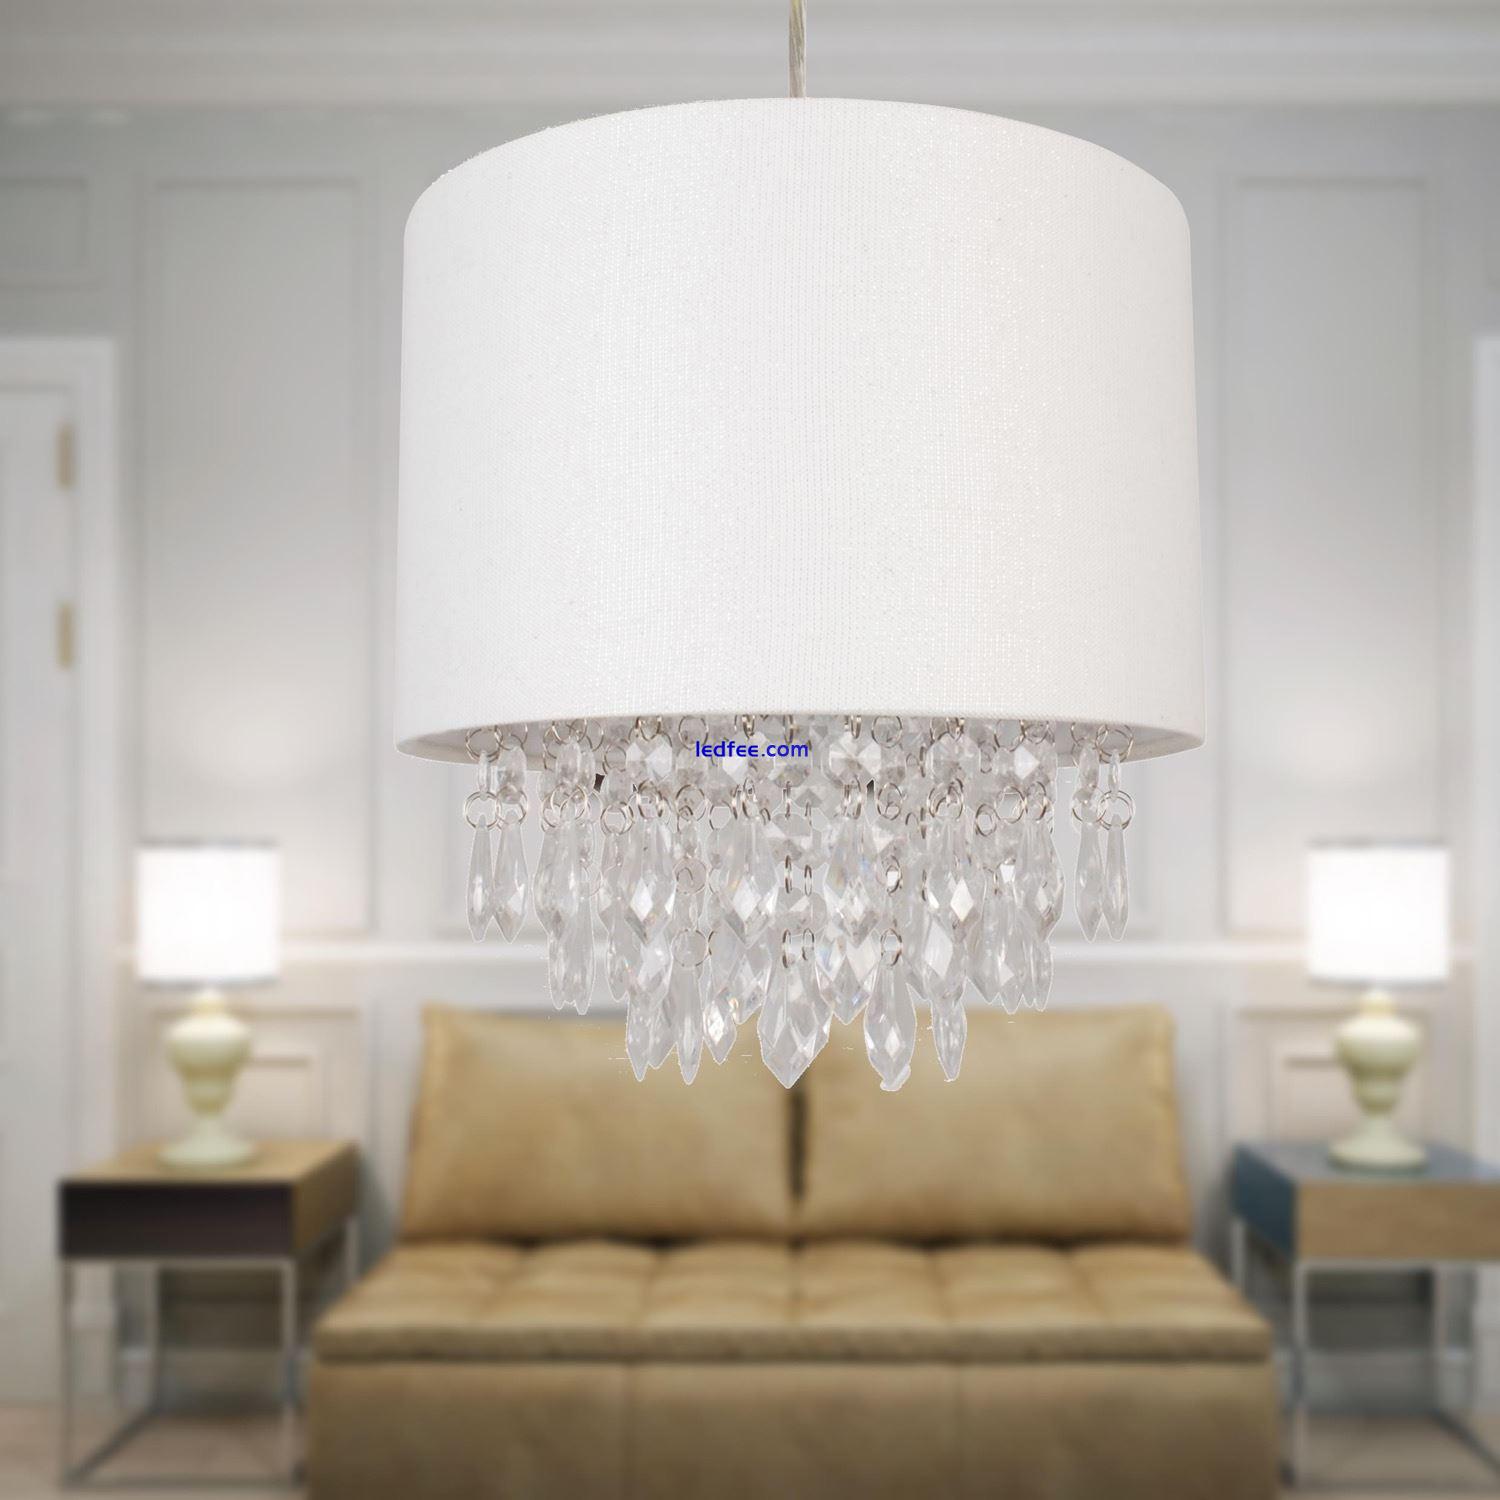 Set of 2 Sparkle Off White 25cm Jewelled Ceiling Lightshades Pendant Shades 5 